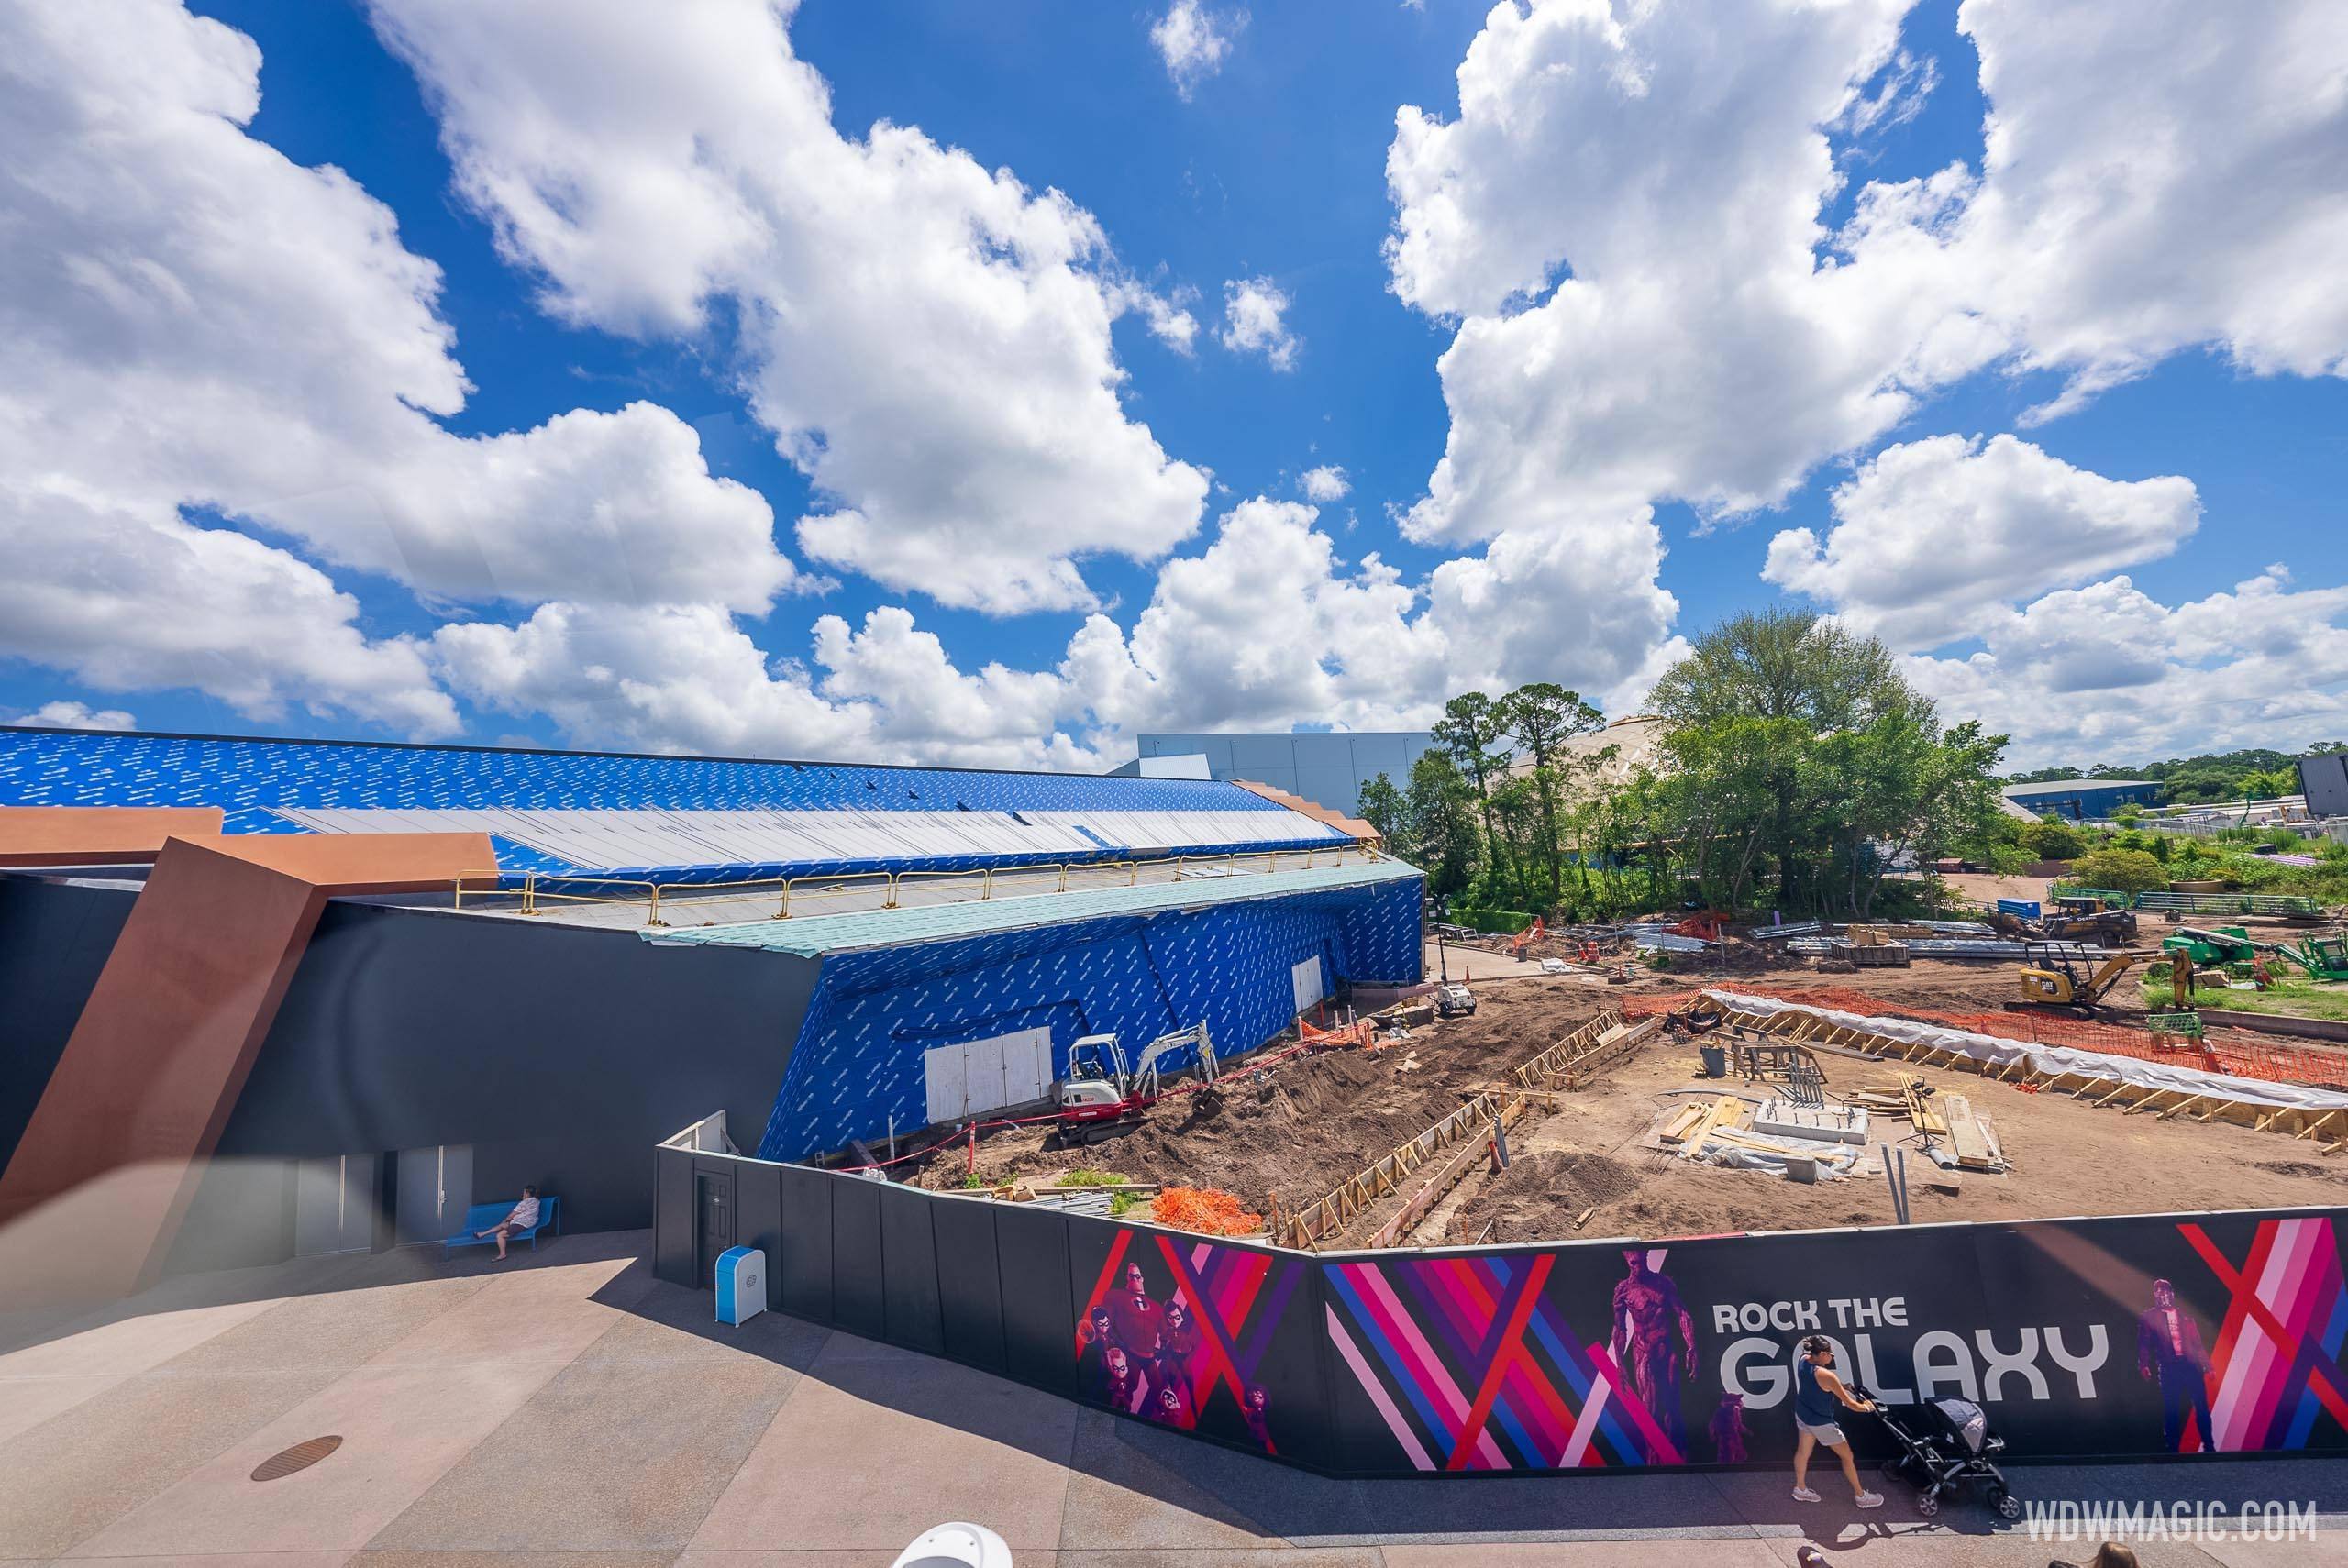 Guardians of the Galaxy Cosmic Rewind construction update from EPCOT as the project enters its fifth year